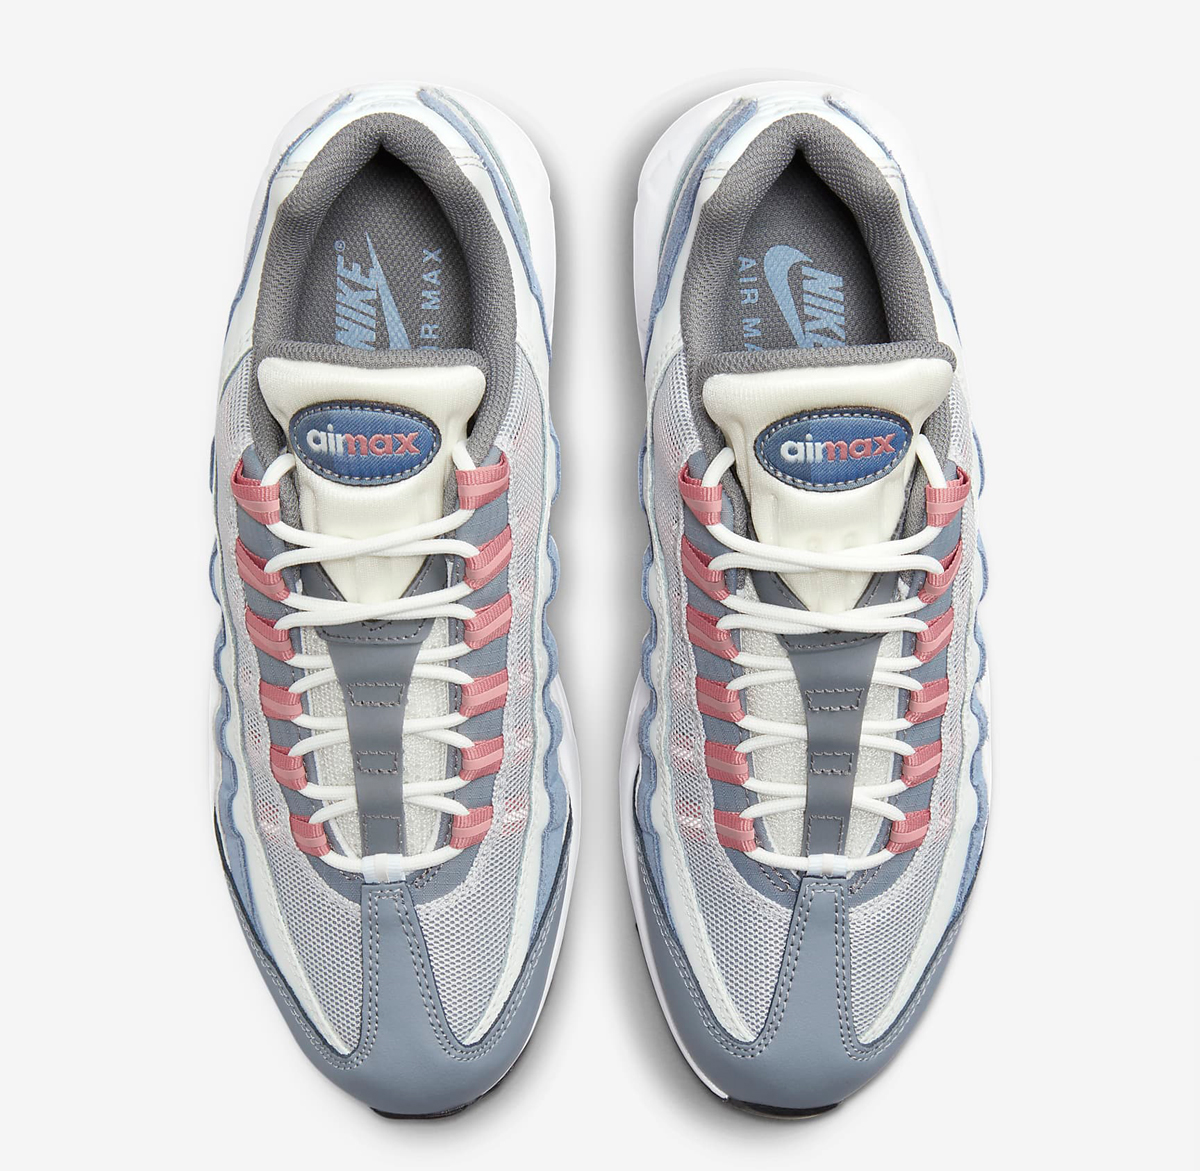 Nike-Air-Max-95-Vast-Grey-Red-Stardust-Release-Date-4